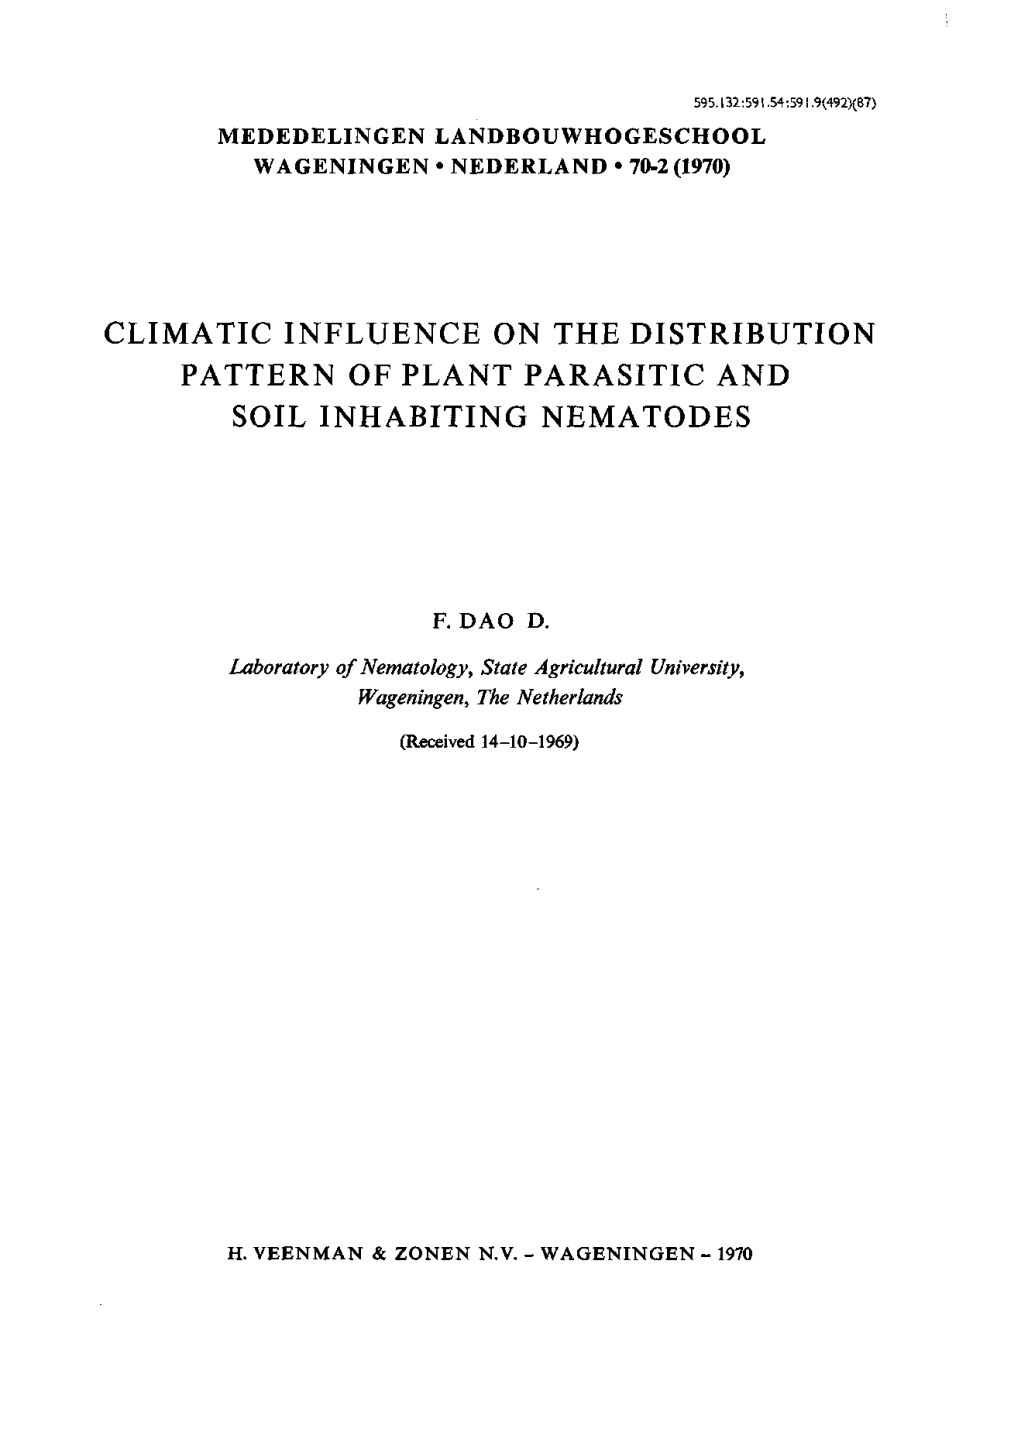 Climatic Influence on the Distribution Pattern of Plant Parasitic and Soil Inhabiting Nematodes